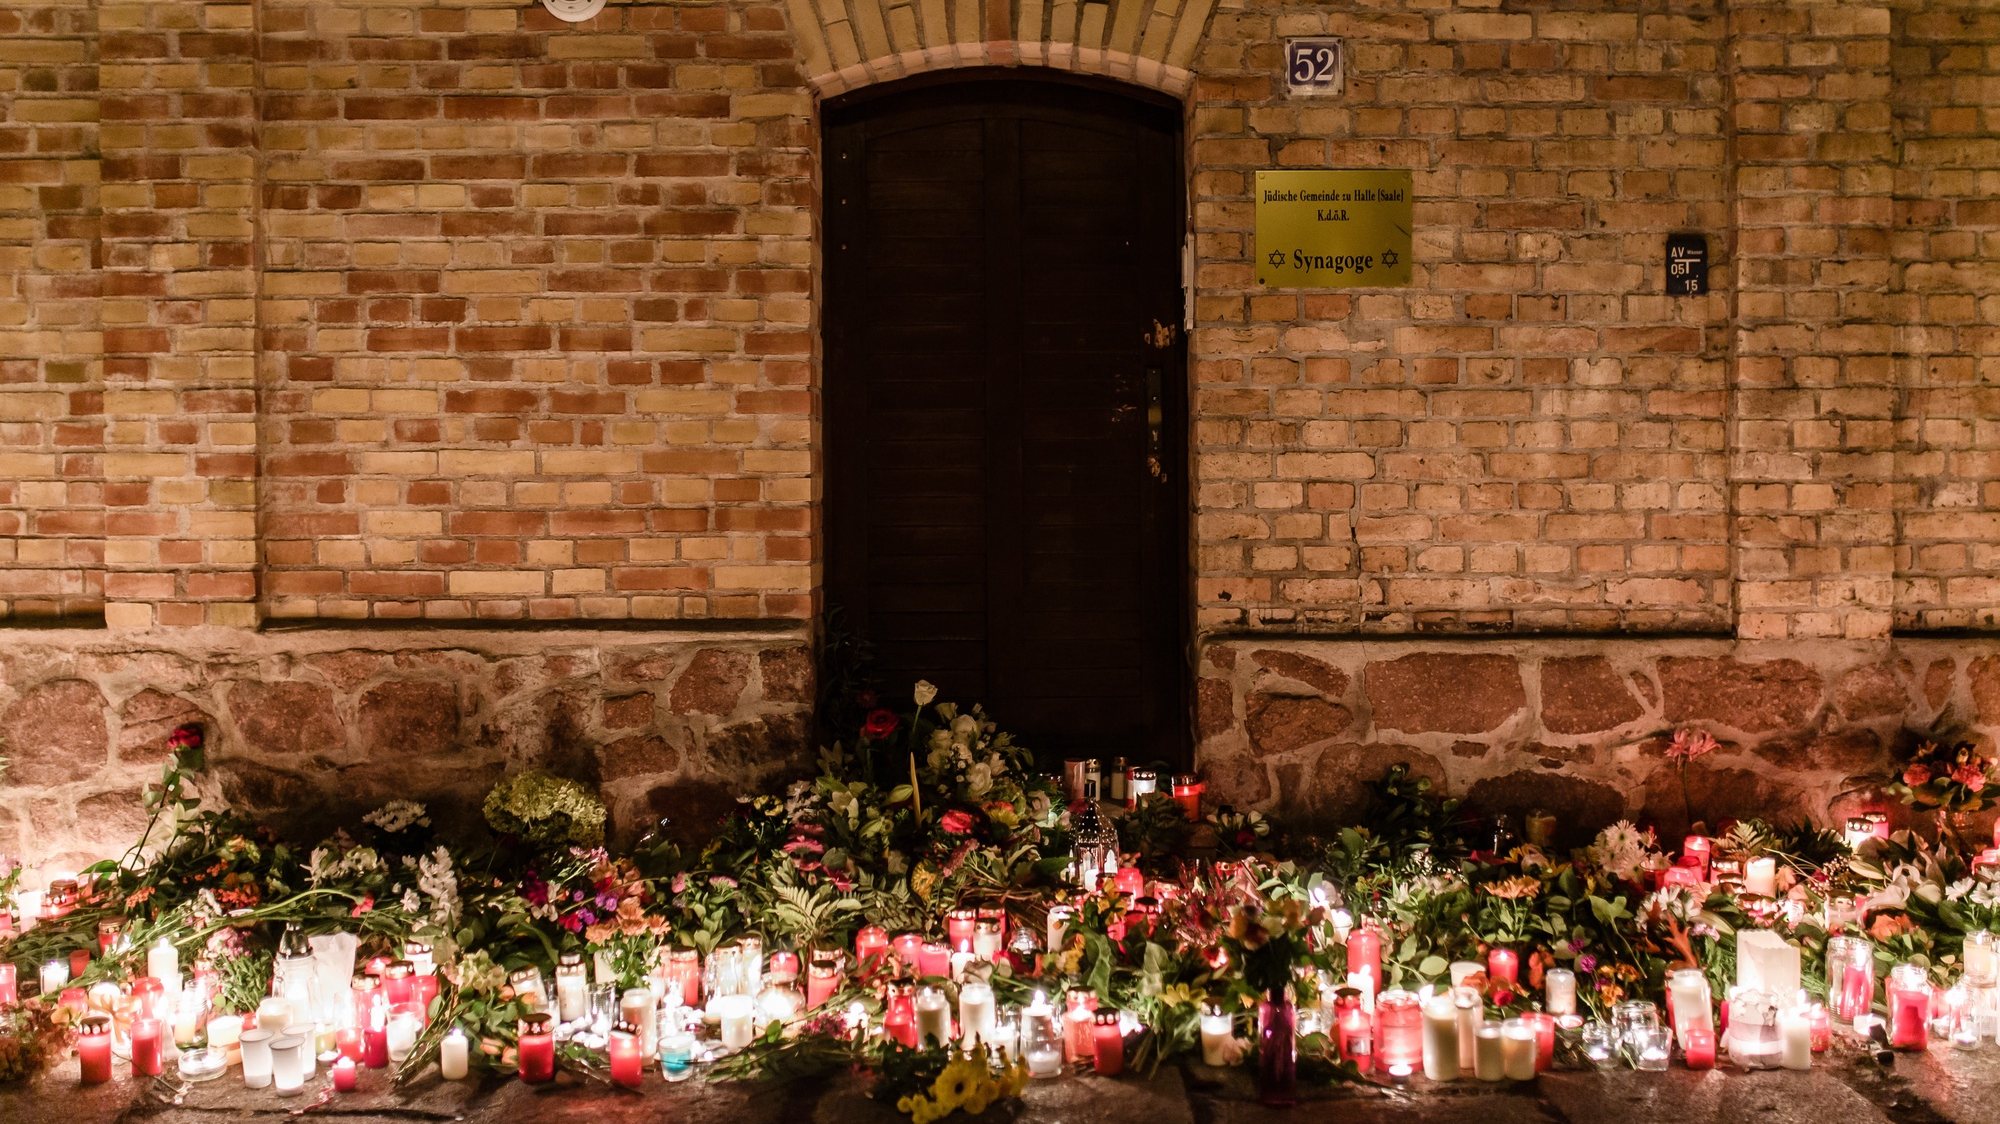 epa08891360 (FILE) - Candles and flowers are laid in front of the synagogue after an attack in which a man went on rampage shooting and tried to enter the Halle synagogue during celebrations of Yom Kippur, in Halle Saale, Germany, 10 October 2019 (reissued 18 December 2020). The trial of the Halle syangogue shooting is expected to end on 21 December.  EPA/CLEMENS BILAN *** Local Caption *** 55538431